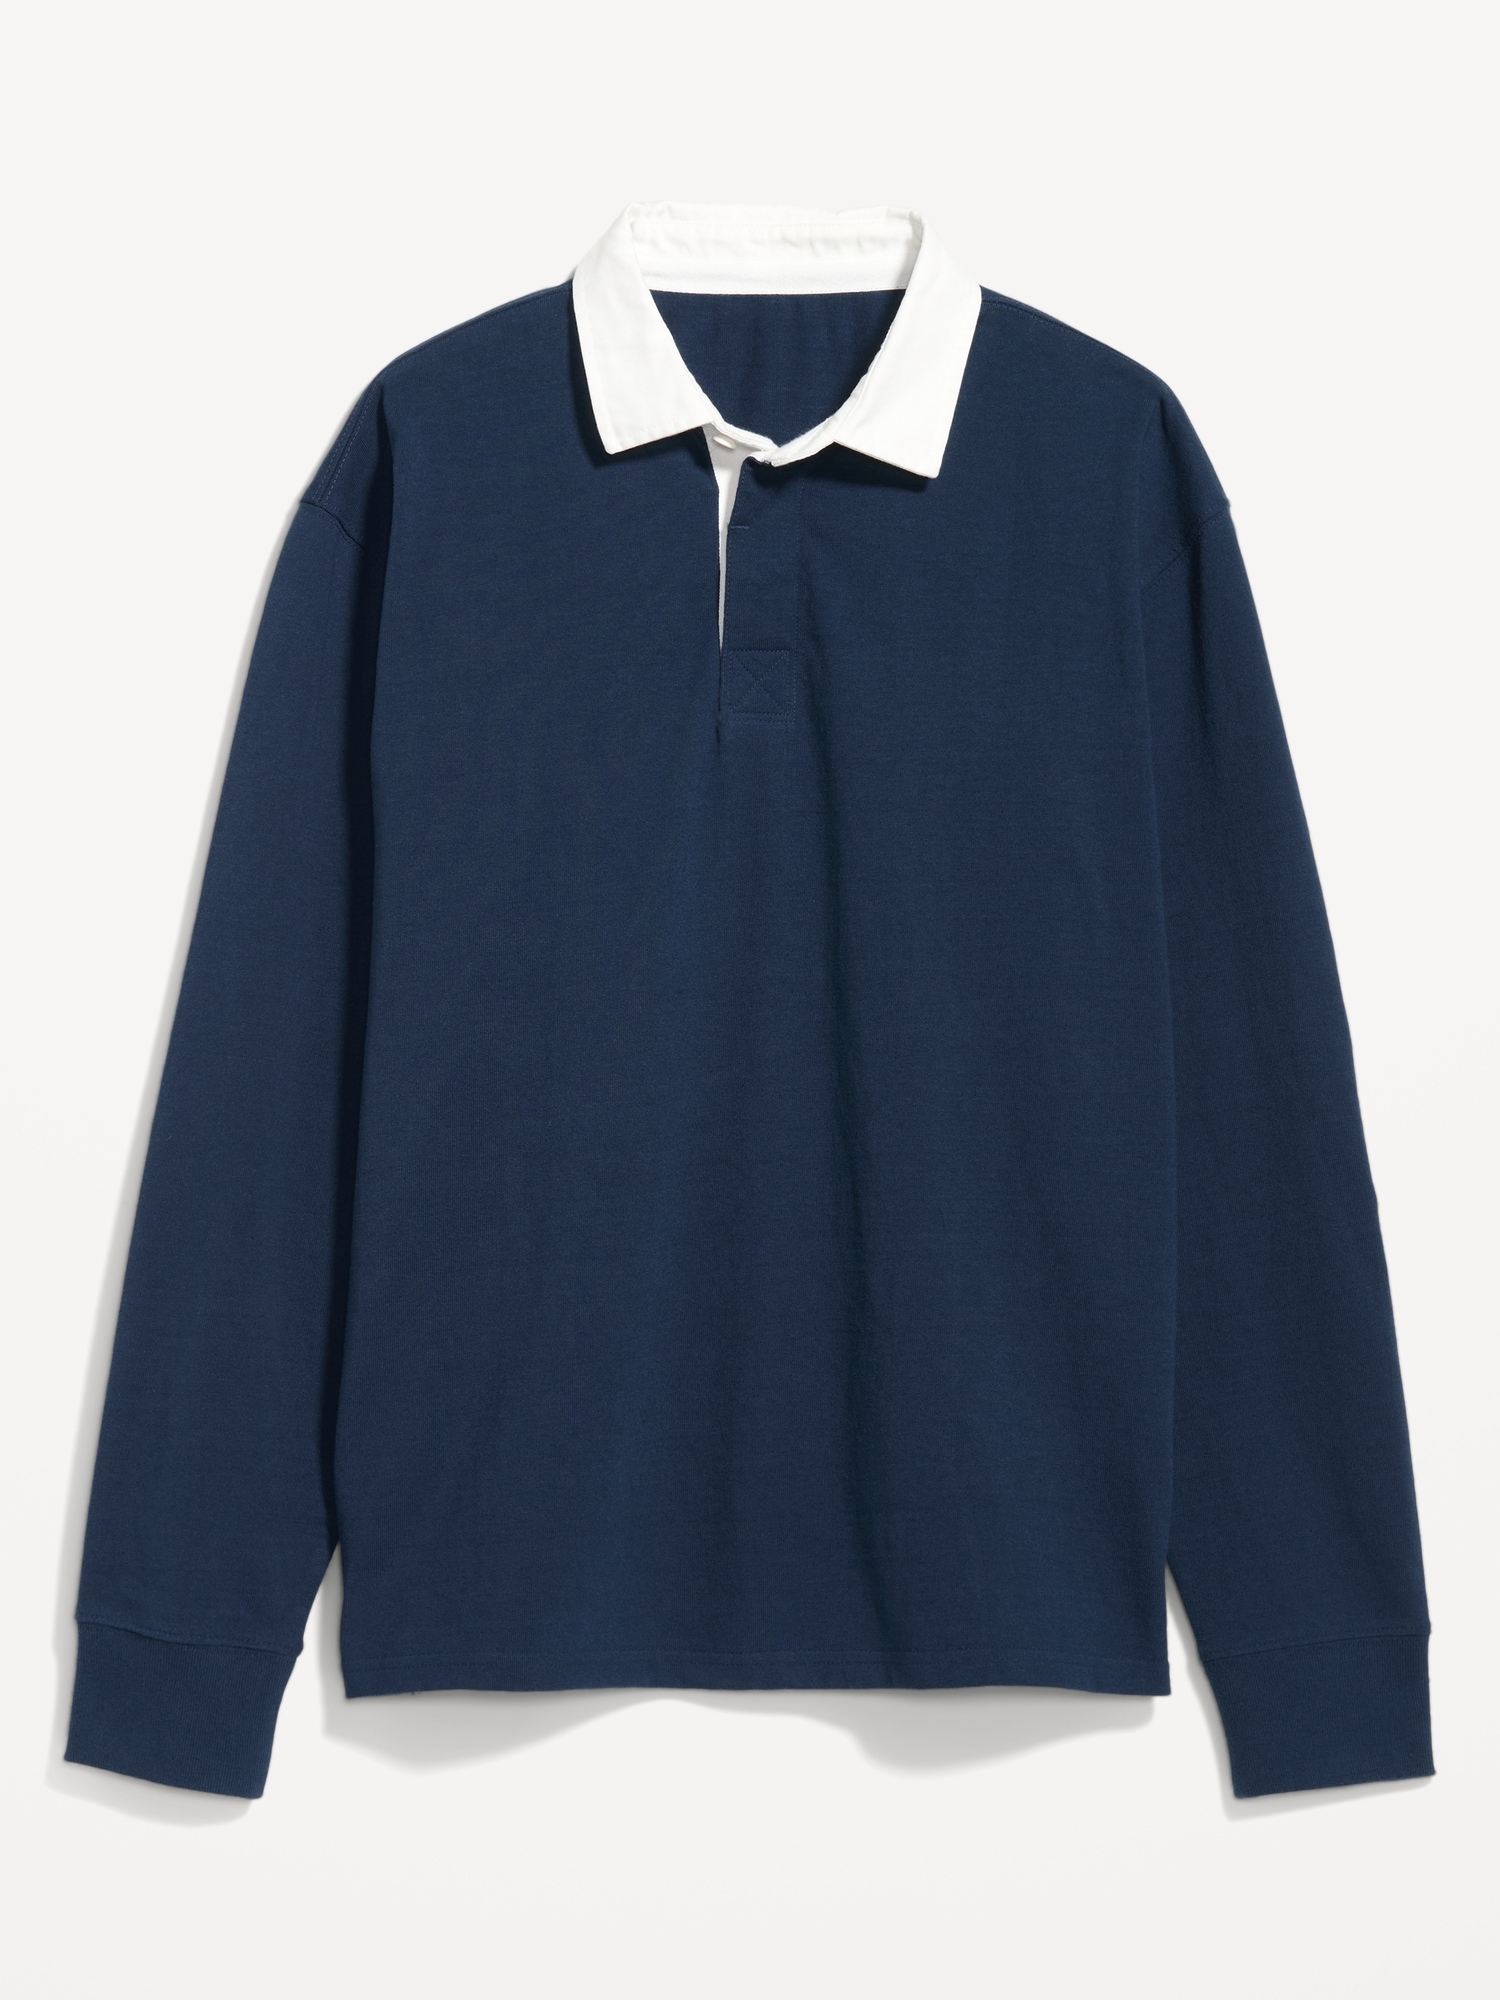 Long-Sleeve Rugby Polo | Old Navy